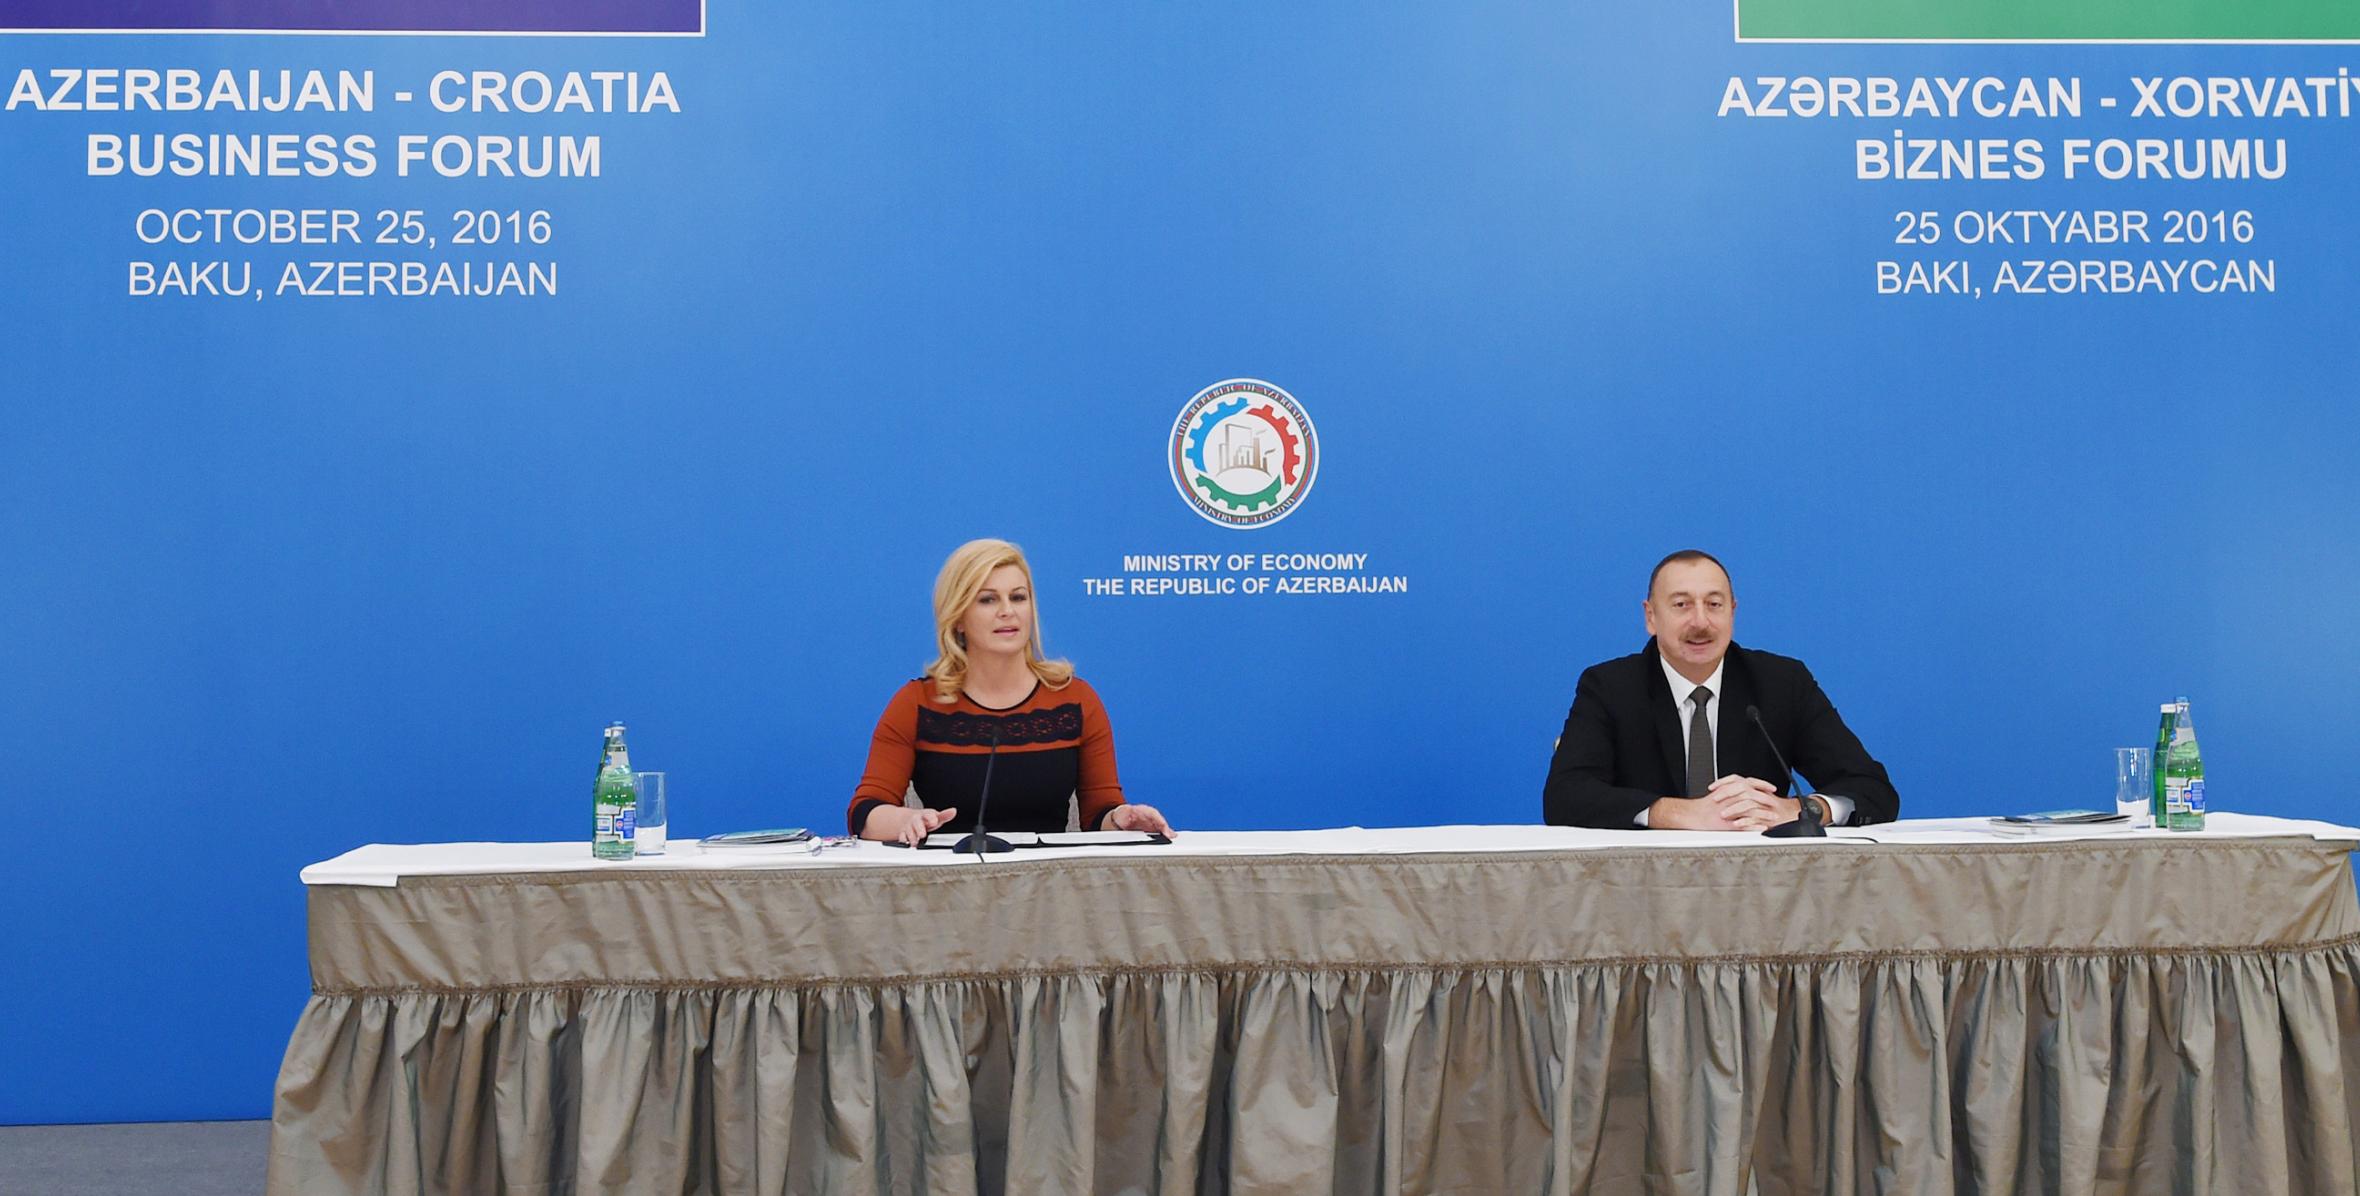 Azerbaijani and Croatian presidents attended the forum